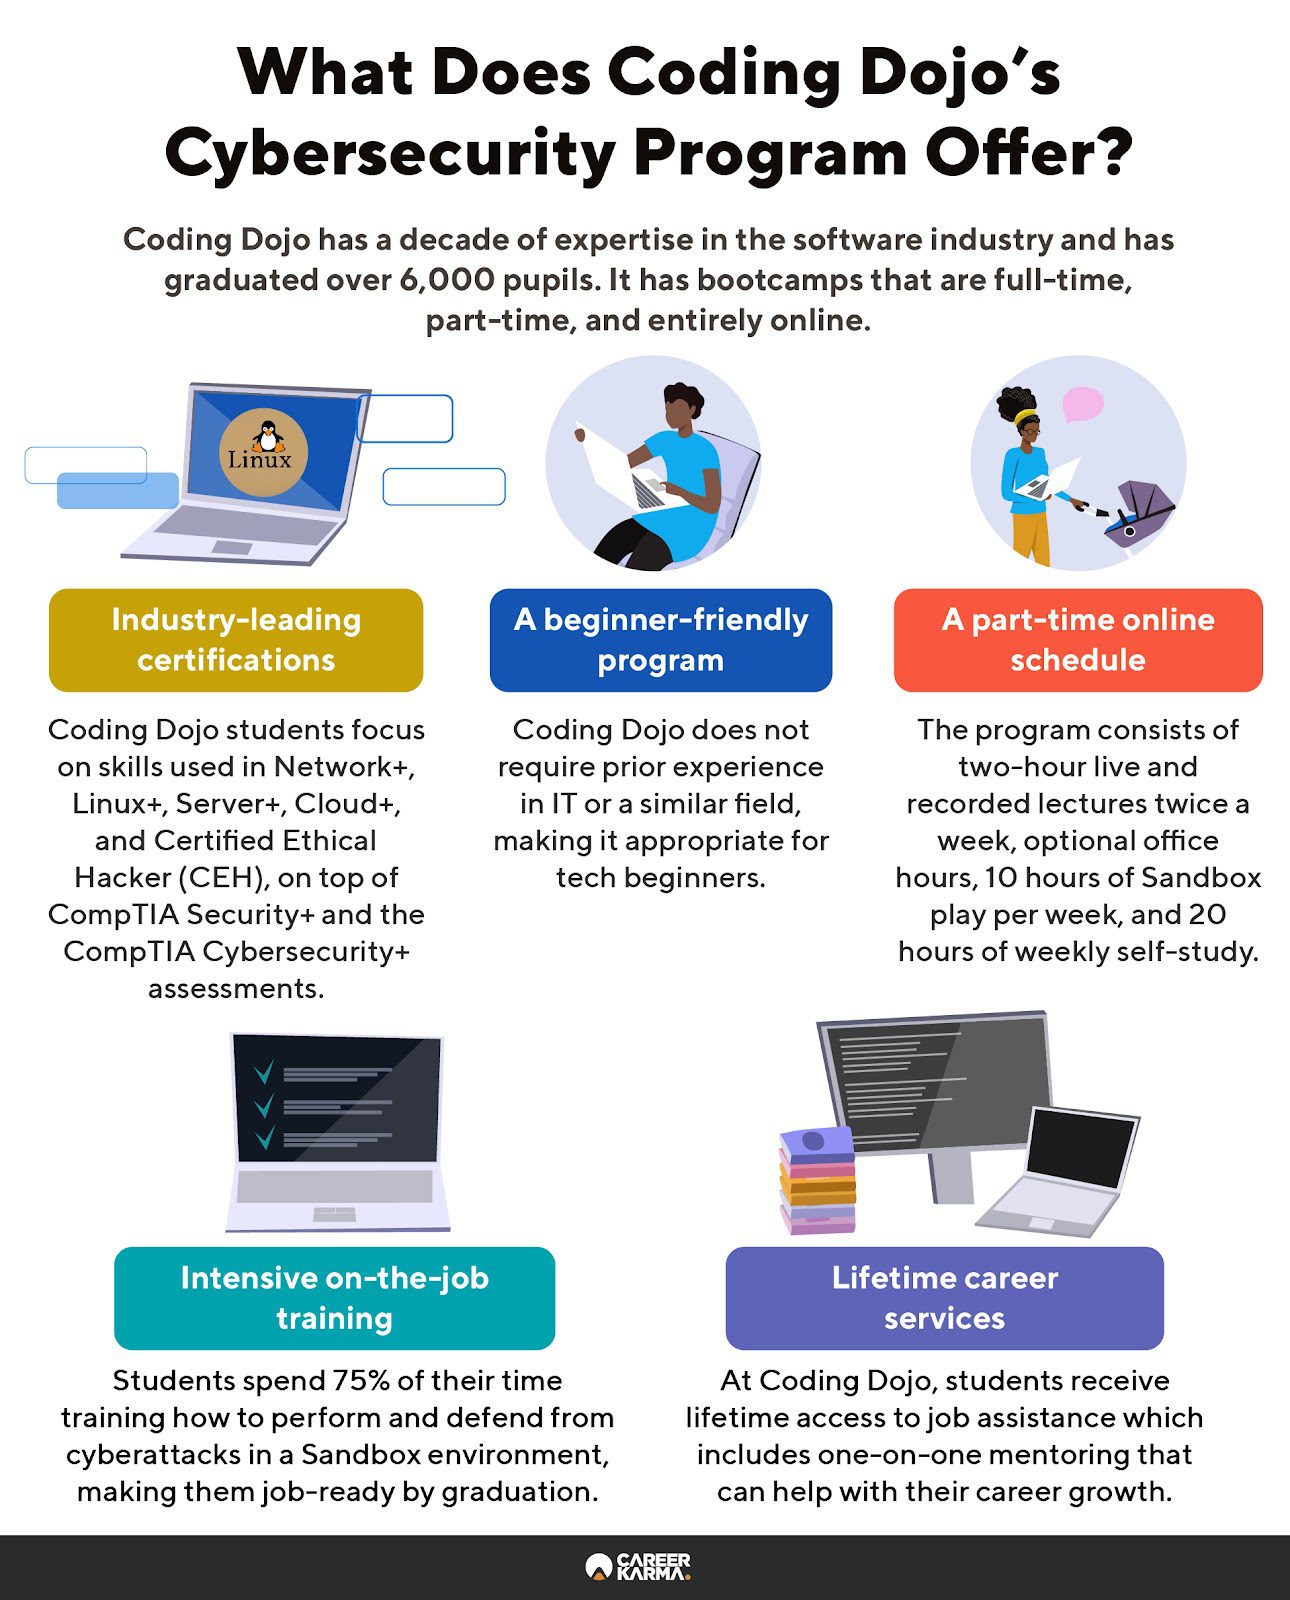 An infographic highlighting the key features of Coding Dojo’s Cybersecurity program